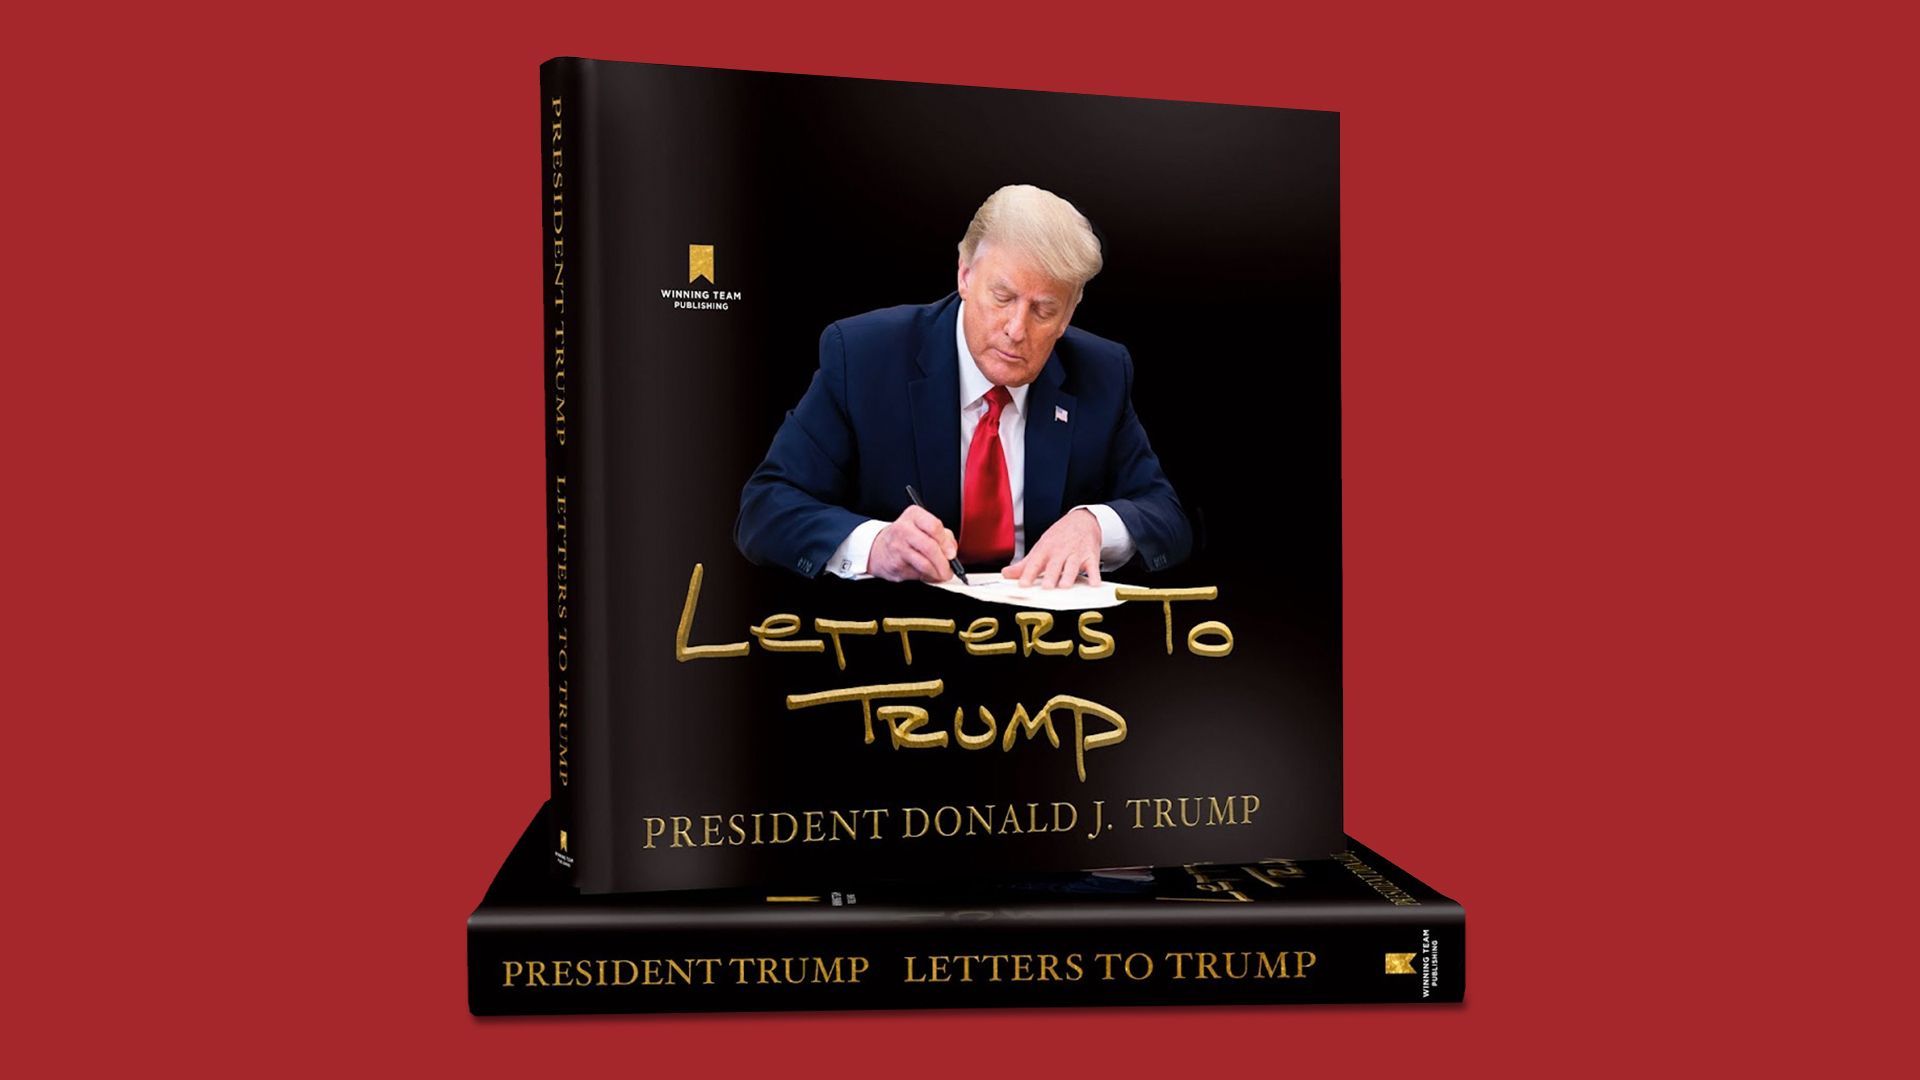 The cover of "Letters to Trump"